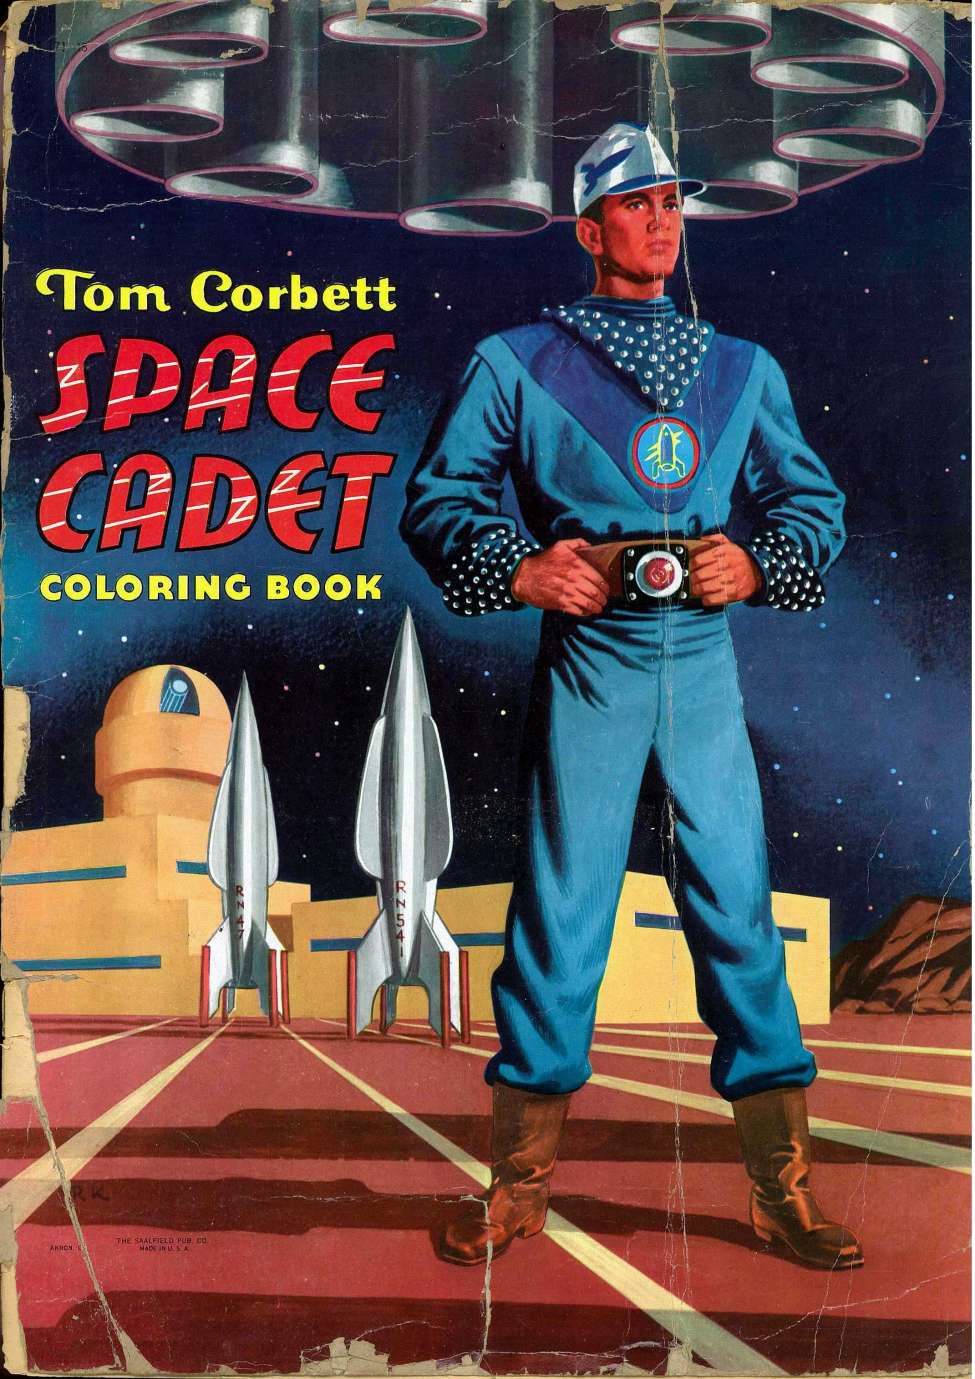 Book Cover For Tom Corbett, Space Cadet Coloring Book